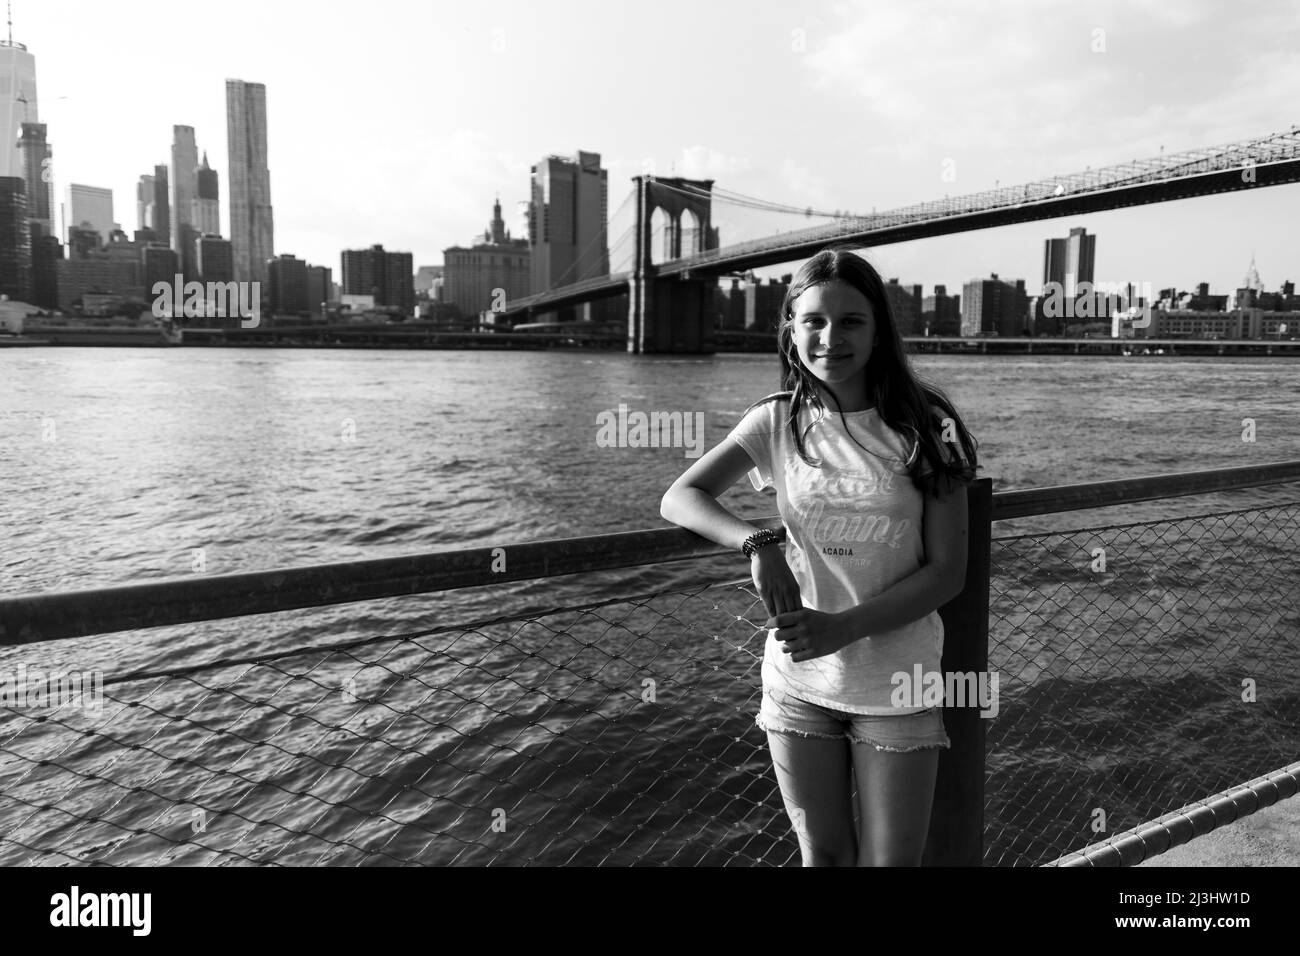 Dumbo/FULTON FERRY, New York City, NY, USA, Two kids in front of the Brooklyn Bridge over East River 14 years old, caucasian teenager girl with brown hair in front of the Brooklyn Bridge Stock Photo